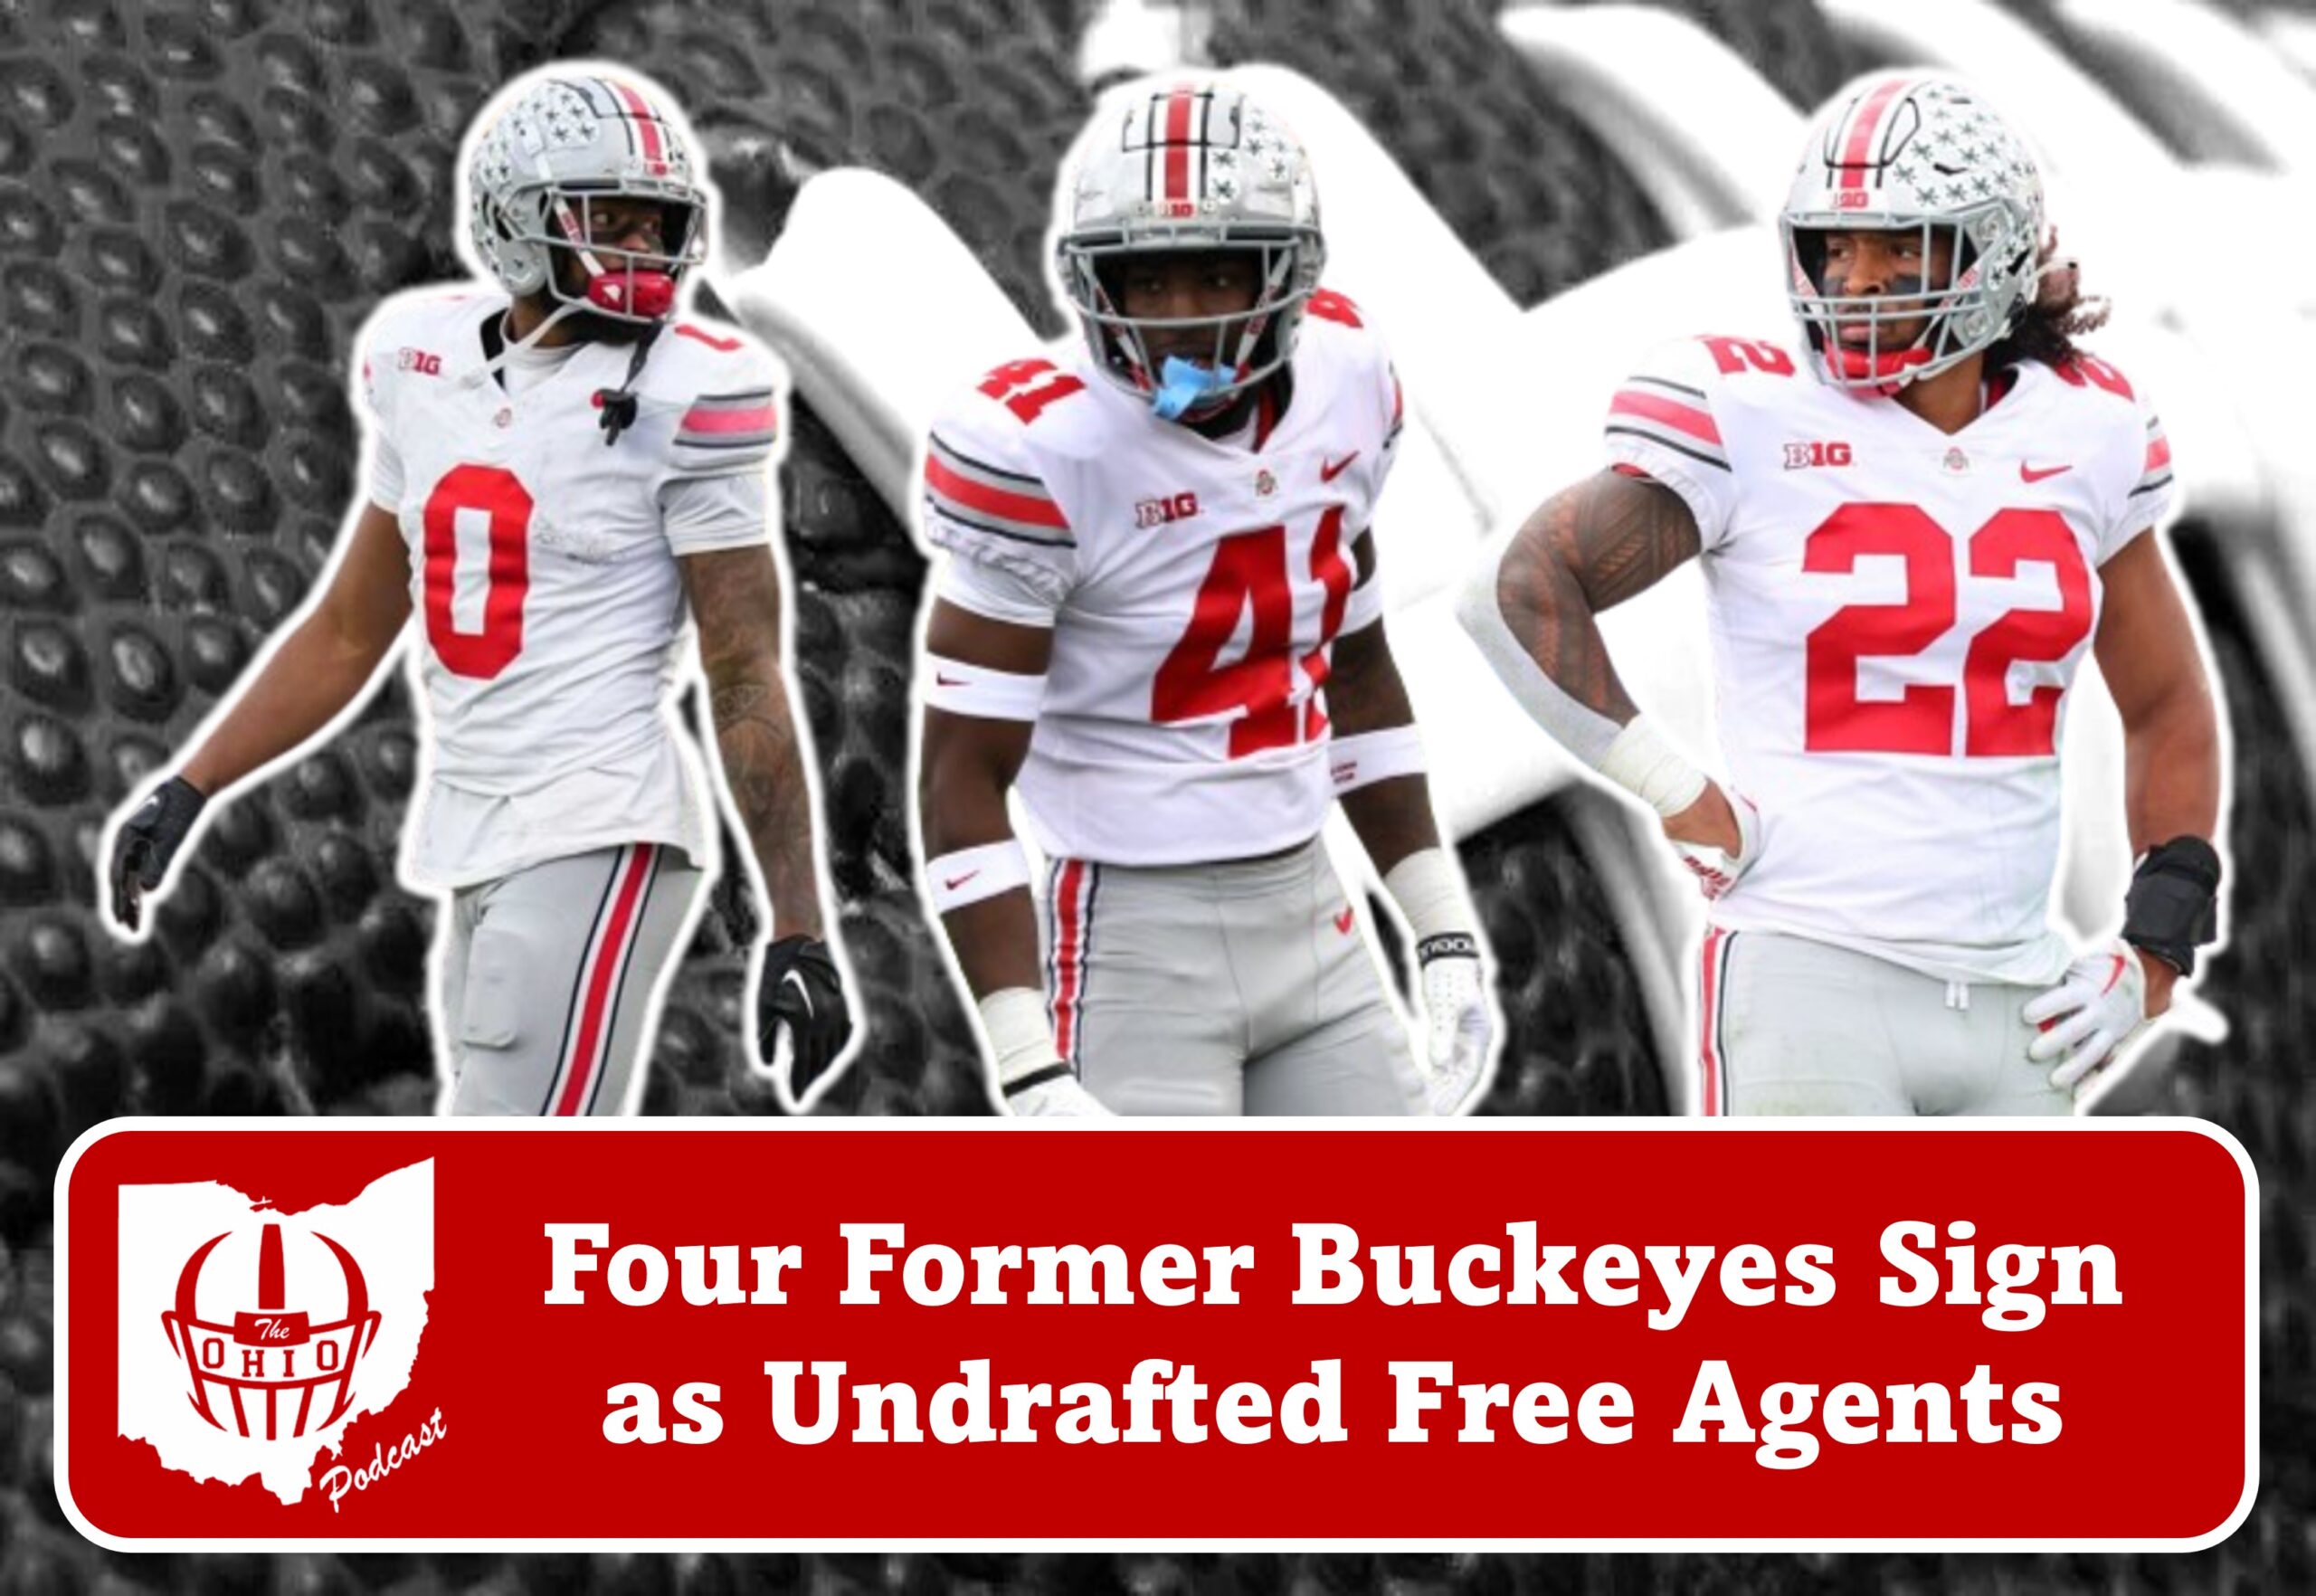 Four Former Buckeyes Pursue their NFL Dreams as Undrafted Free Agents